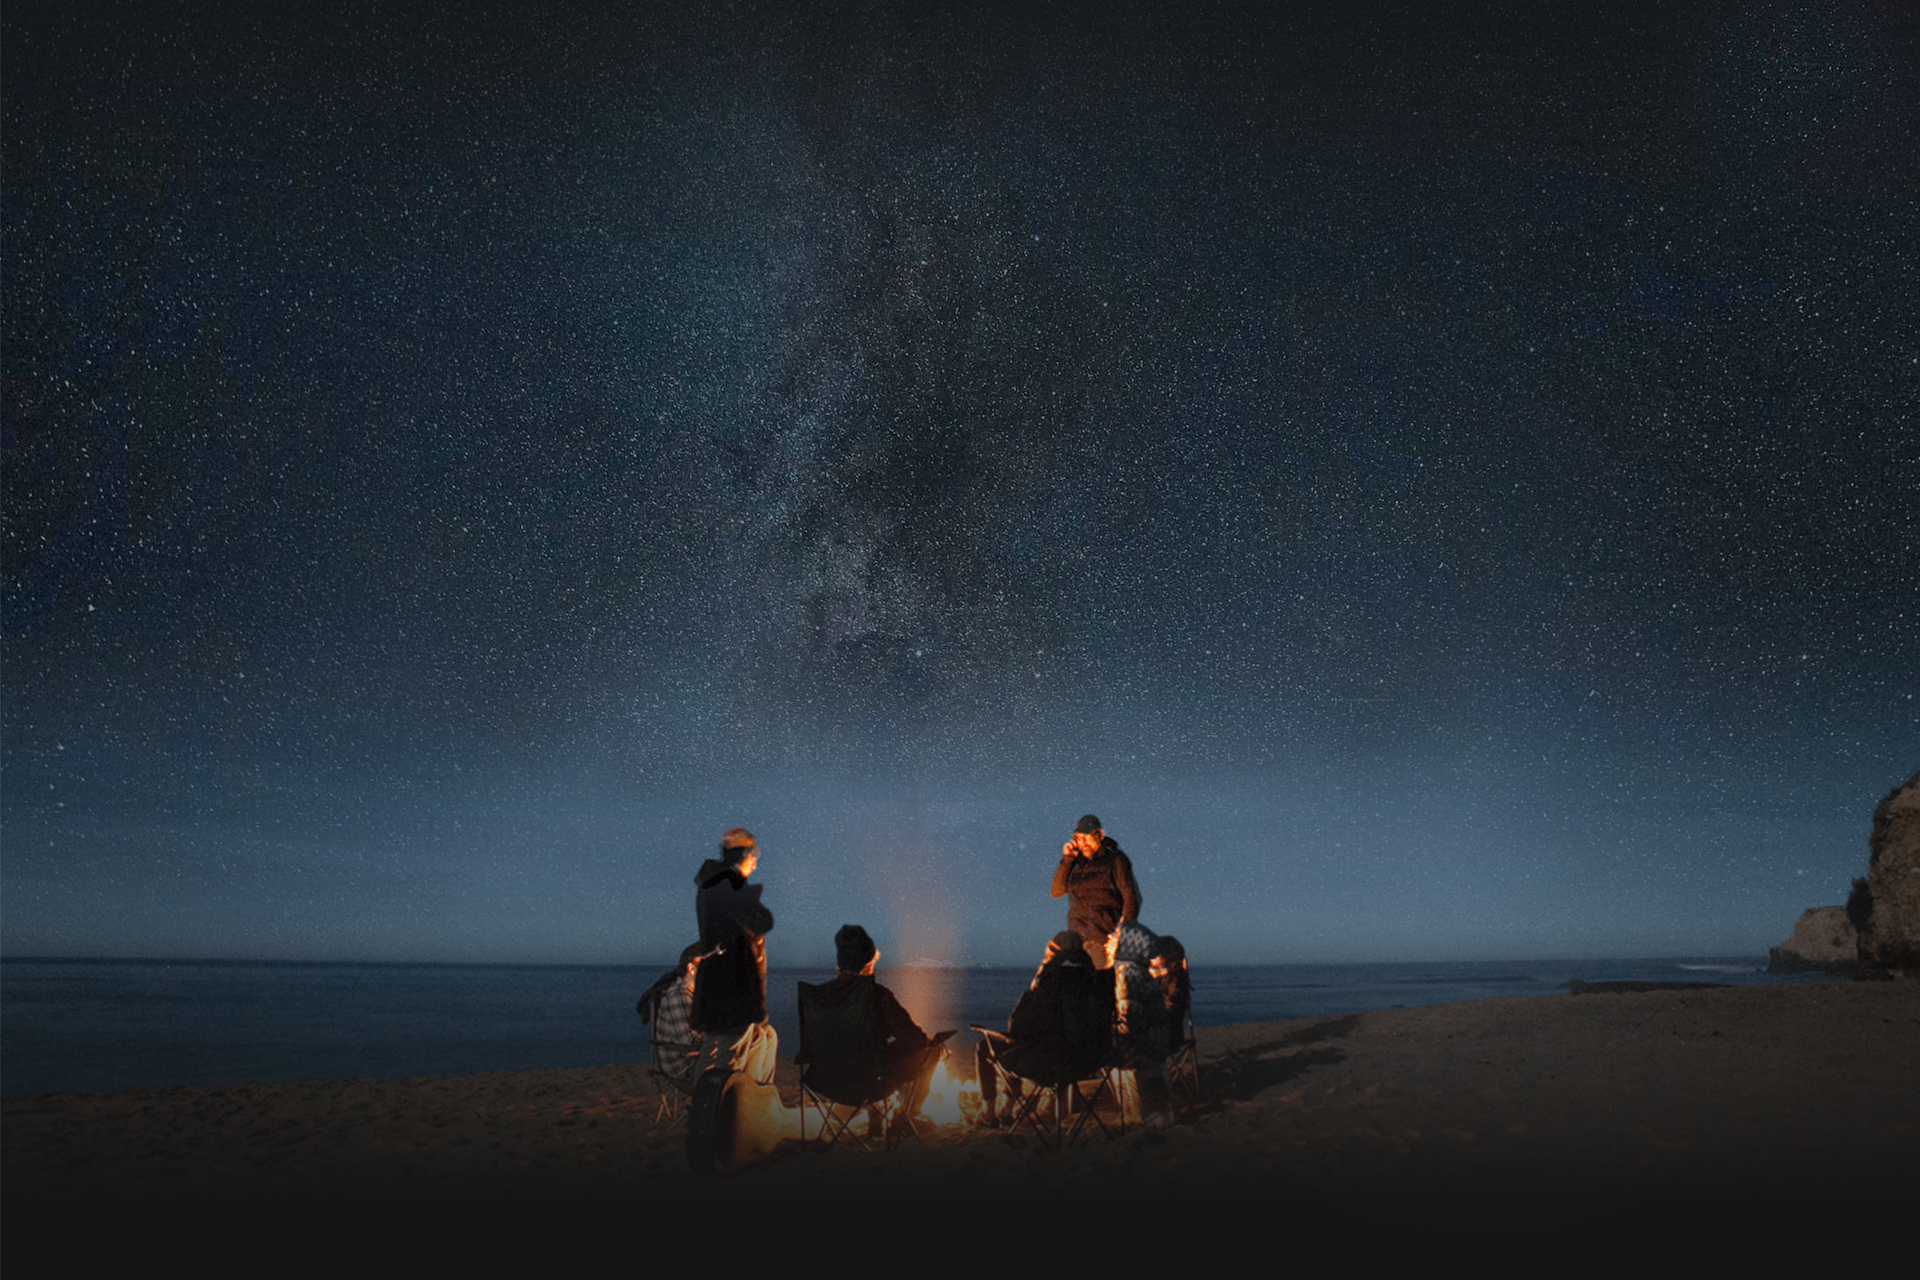 7 people sit and stand around a beach bonfire on a starry night